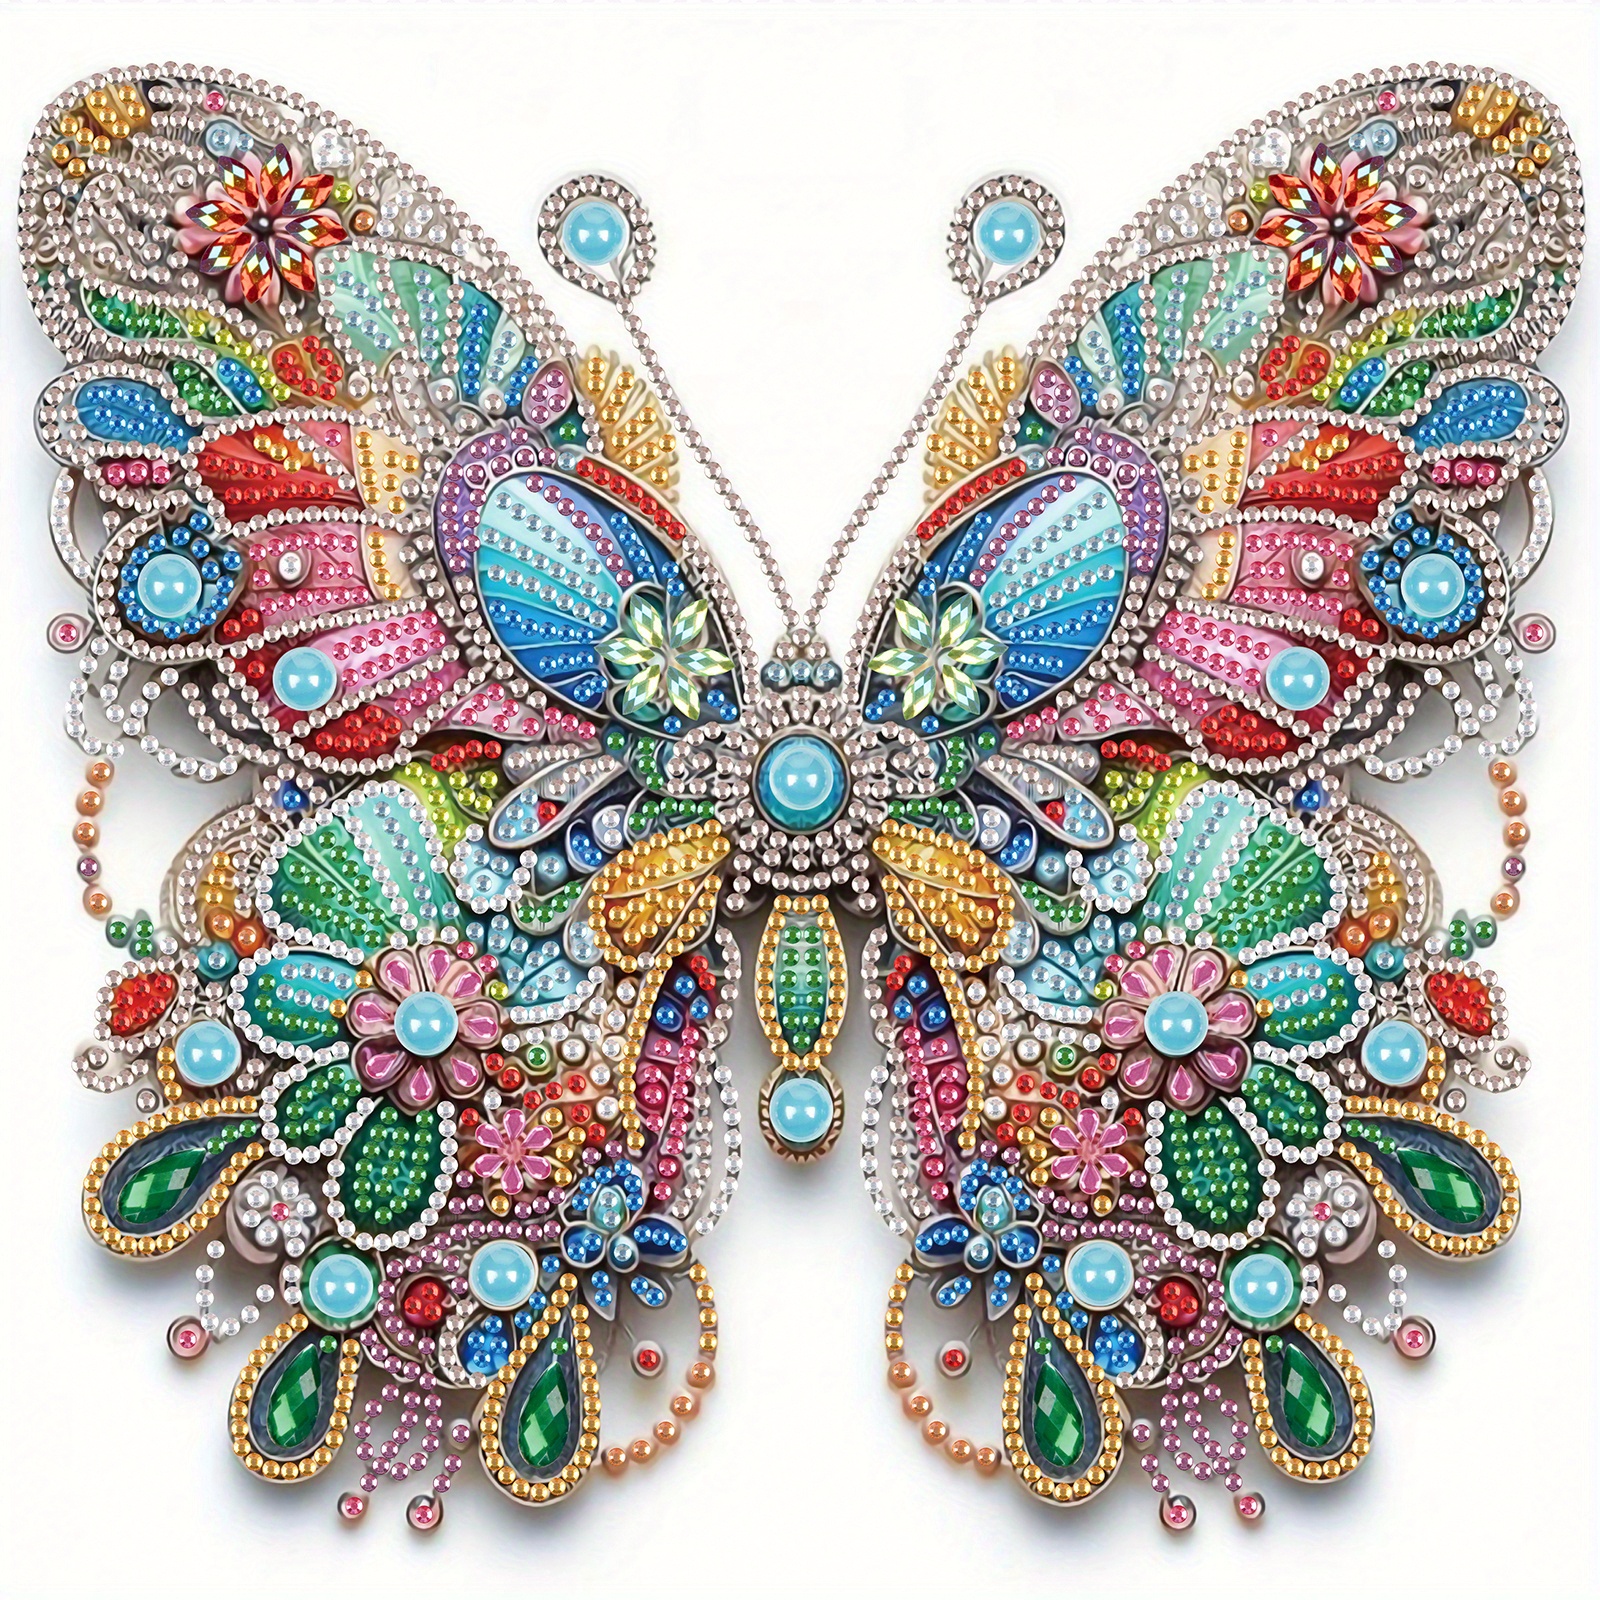 

5d Butterfly Diamond Painting Kit For Adults, Special Shaped Crystal Rhinestone Diamond Embroidery Art, Diy Insect Theme Gem Painting Canvas For Home Wall Decor, 12x12 Inch